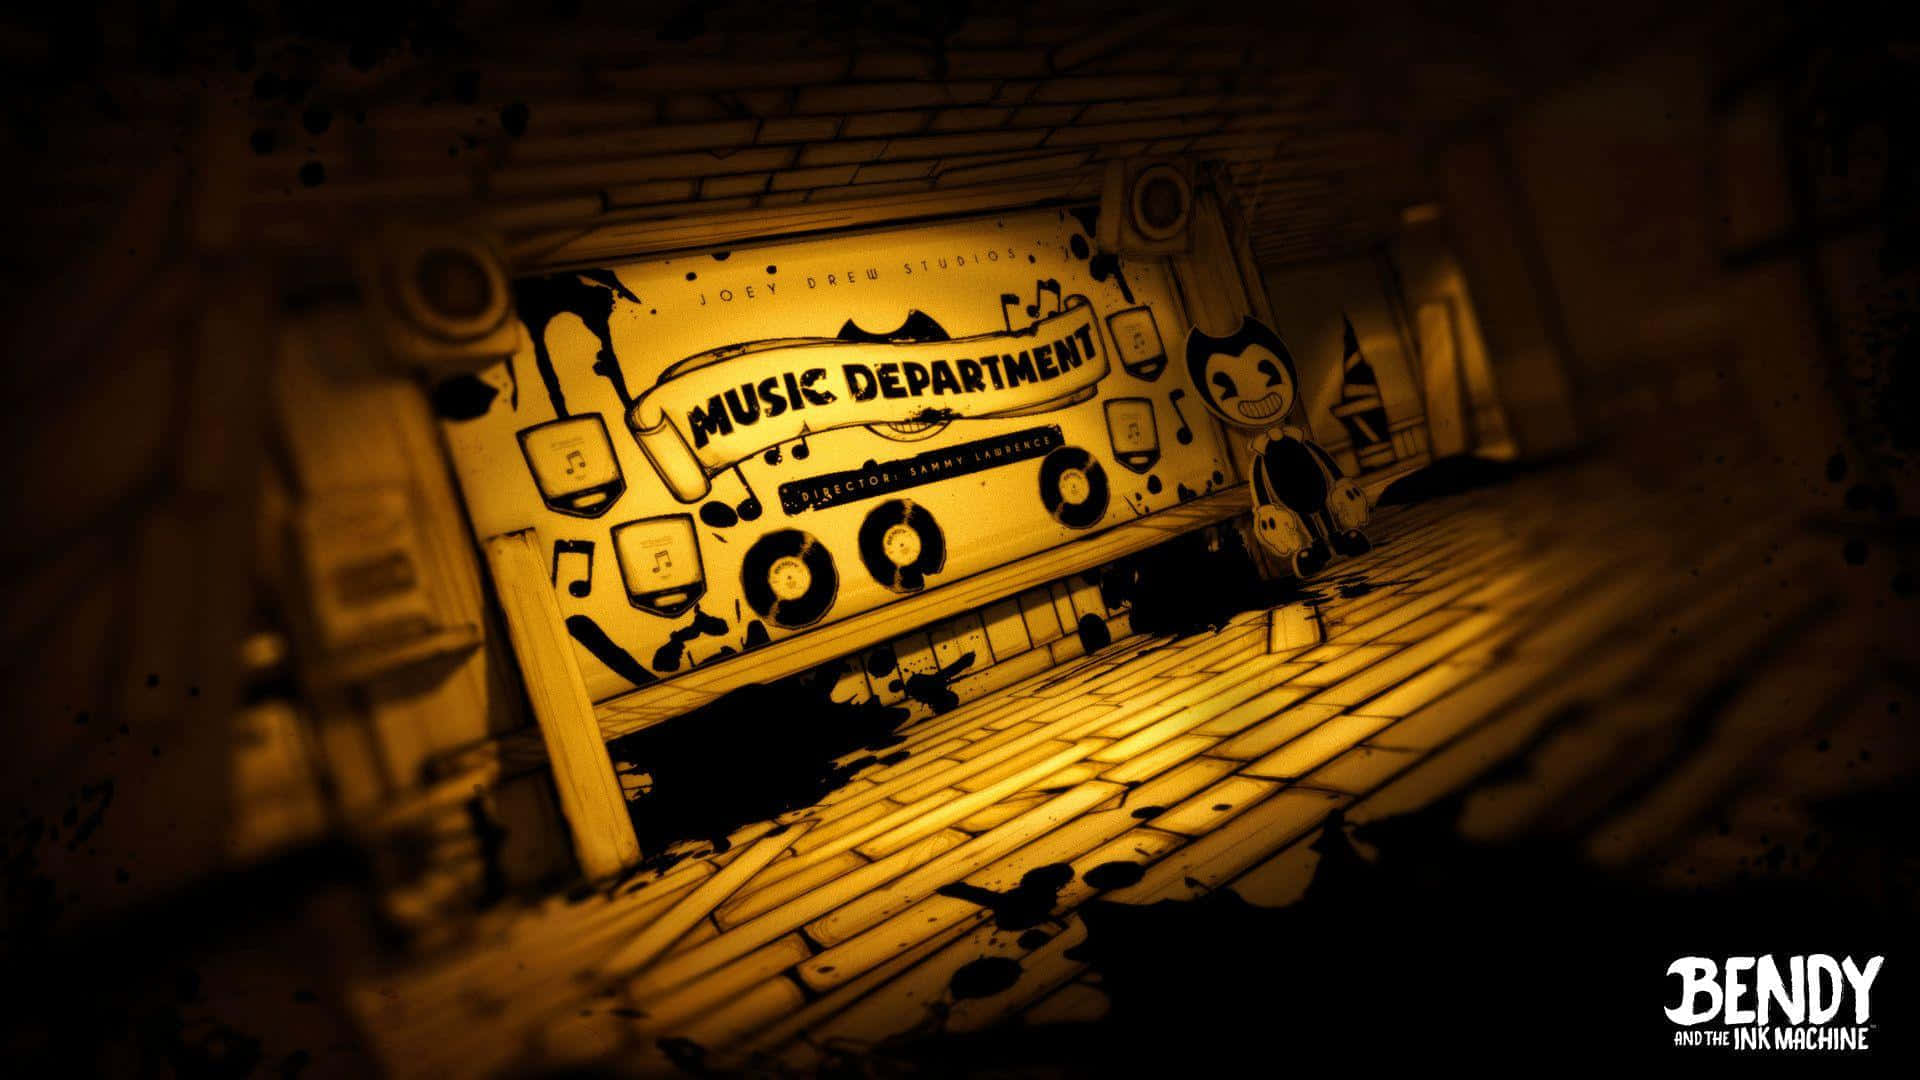 Discover the secrets of Joey Drew Studios in Bendy and the Ink Machine